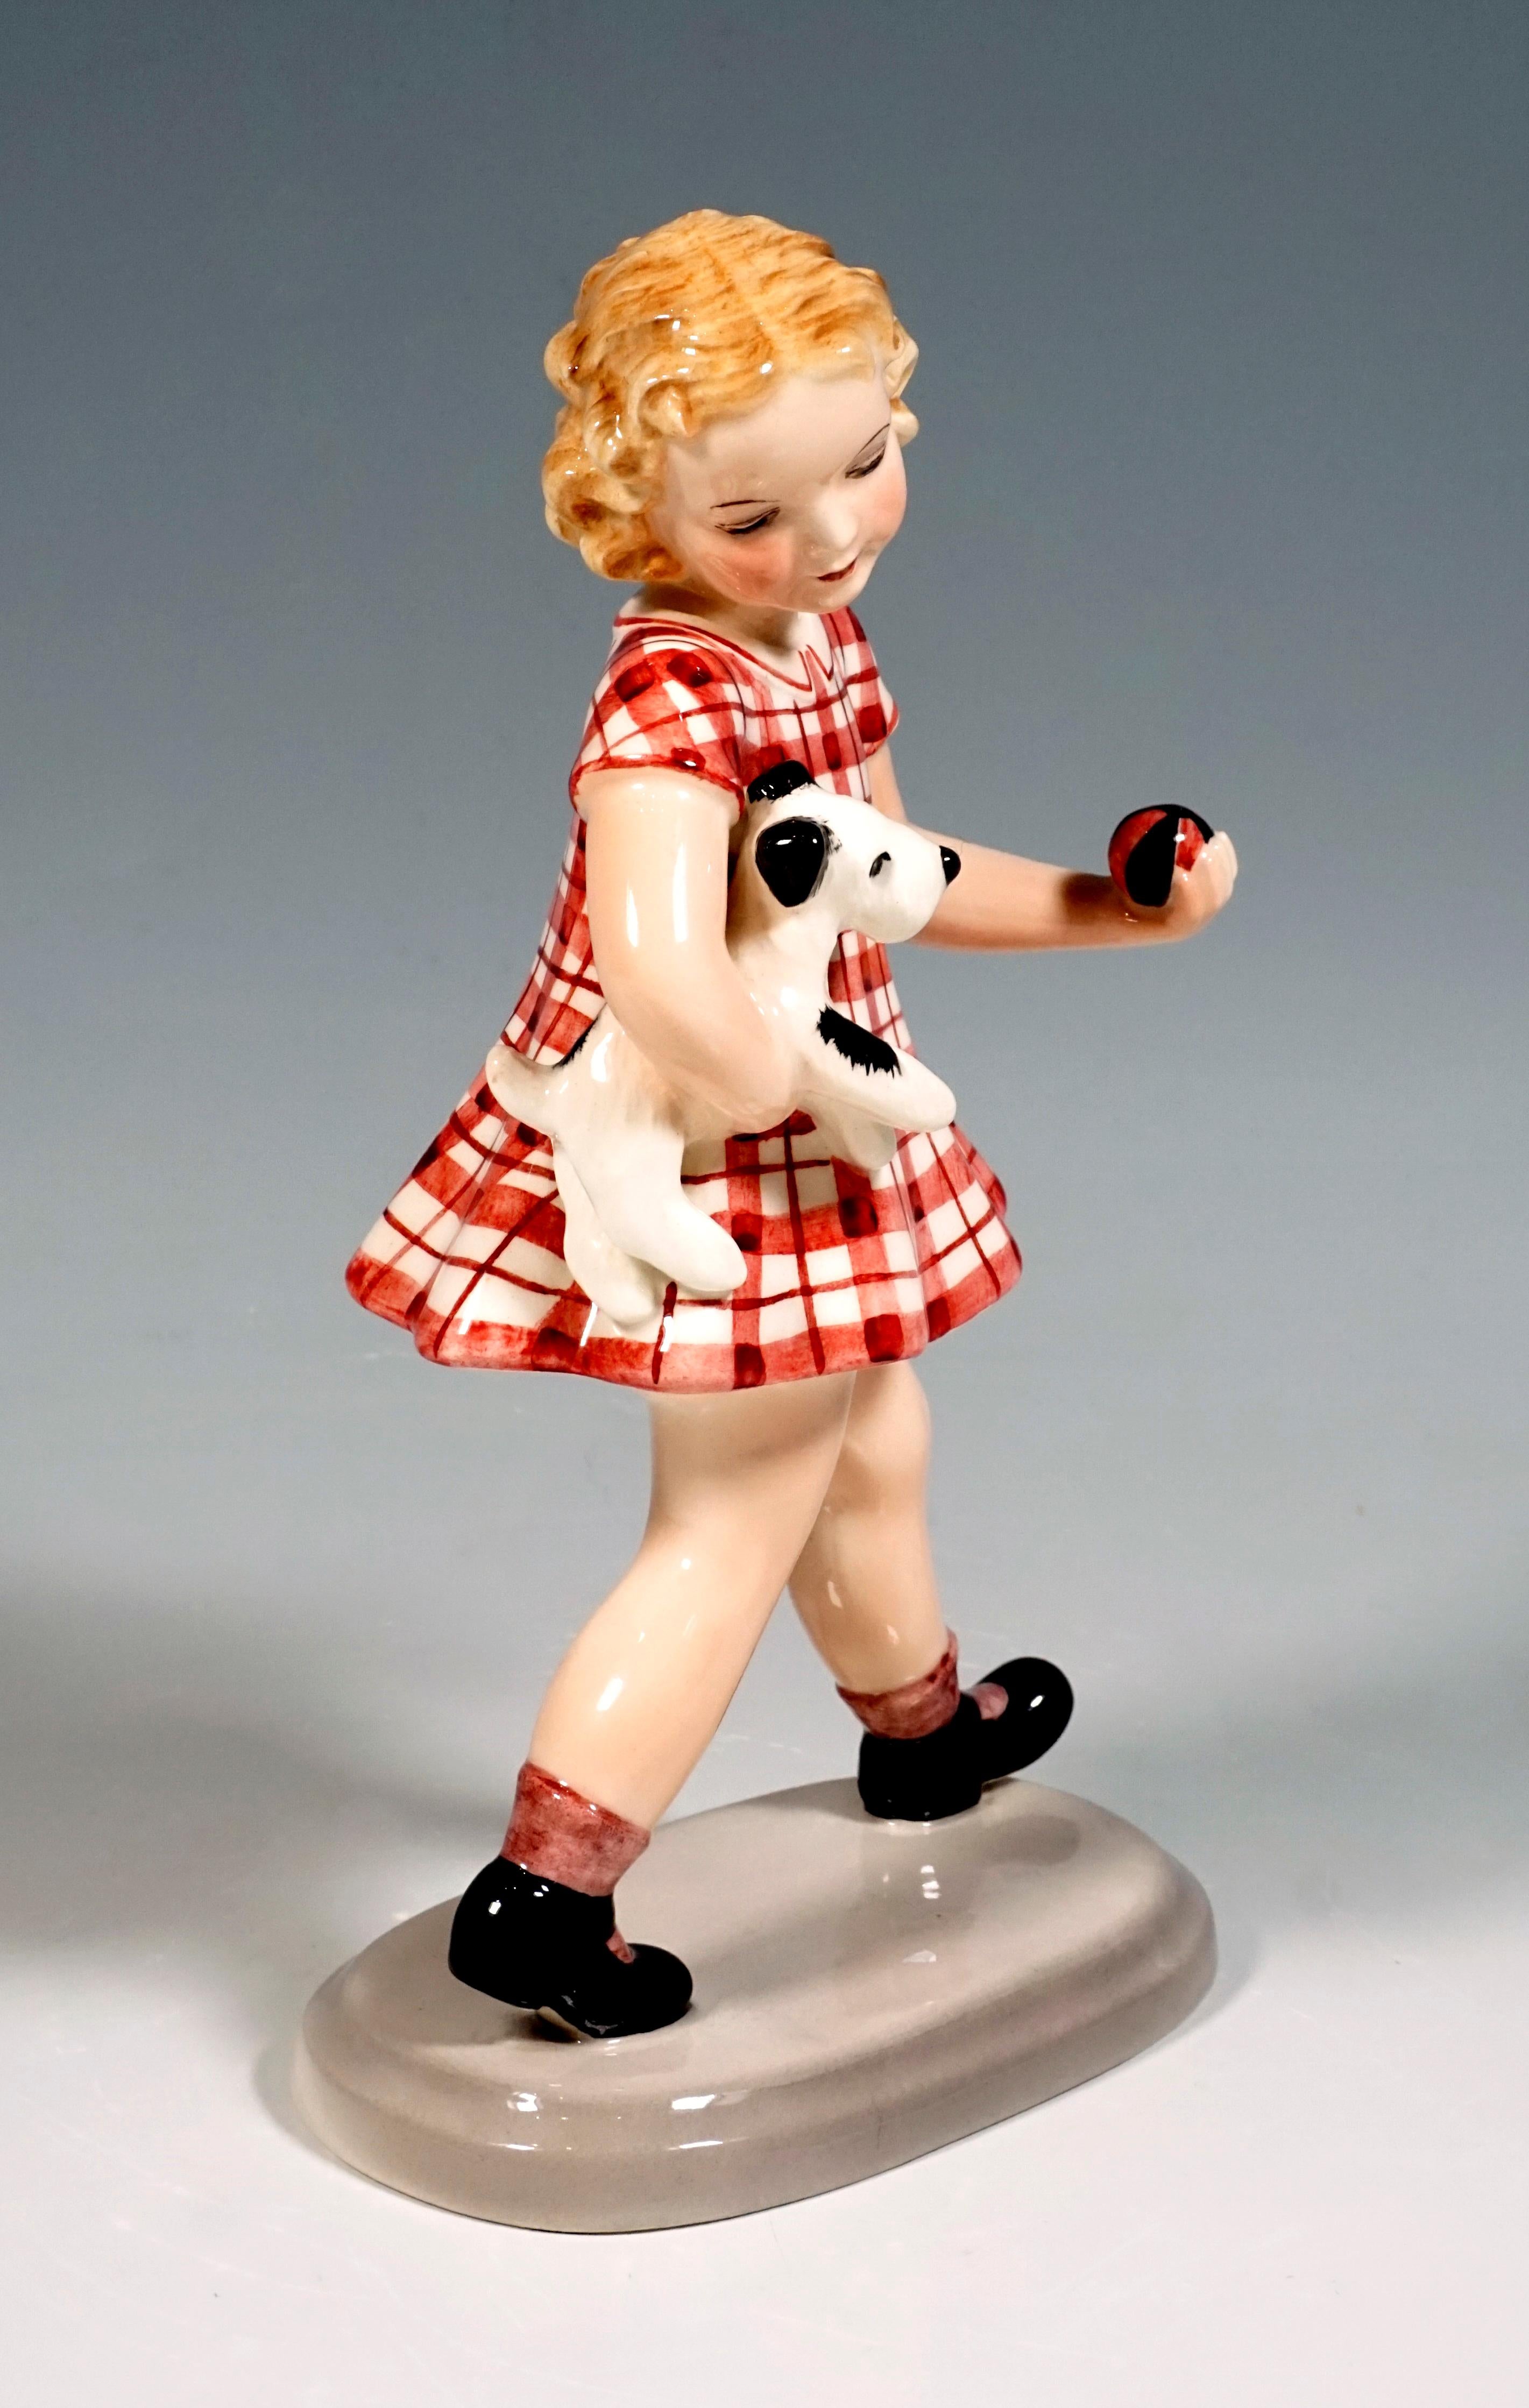 The striding blonde-haired girl in a red checkered dress carries a small dog under her right arm, in her left hand she holds a small red-black ball.
On a beige, oval base.

Designed by Adolf Prischl (1912 - 1970), Sculptor, numerous of his models